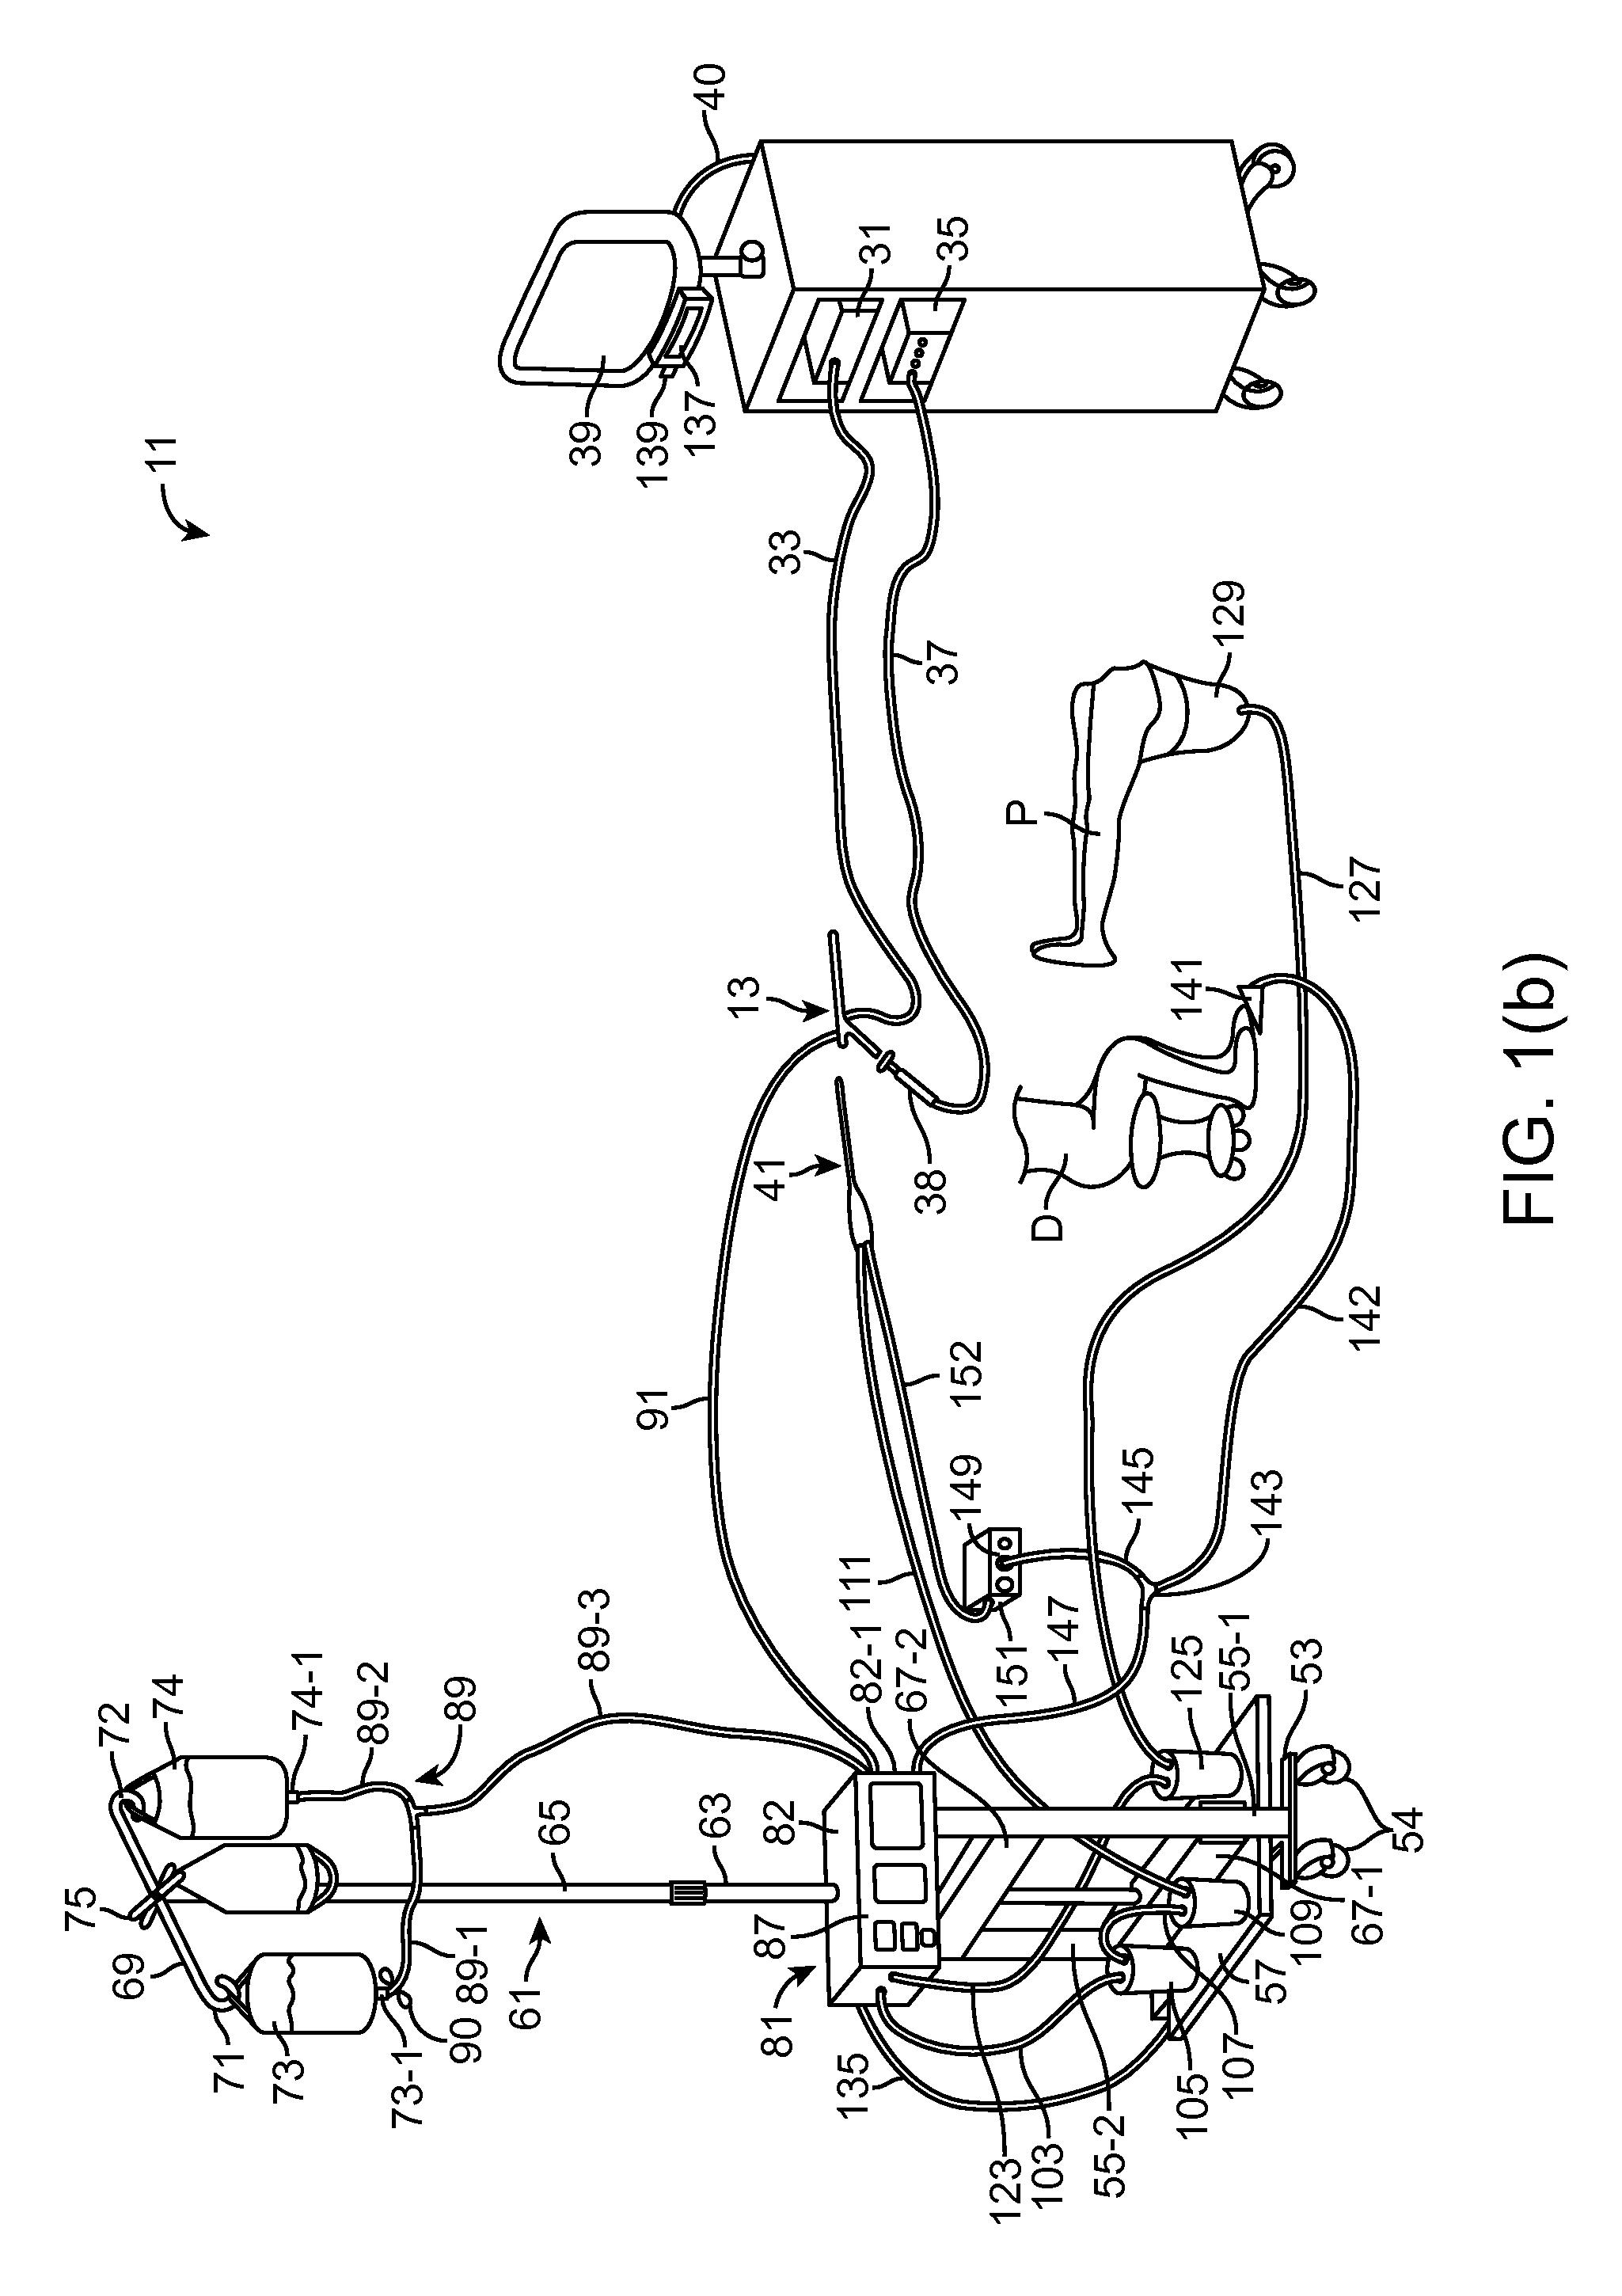 Hysteroscopic tissue removal system with improved fluid management and/or monitoring capabilities